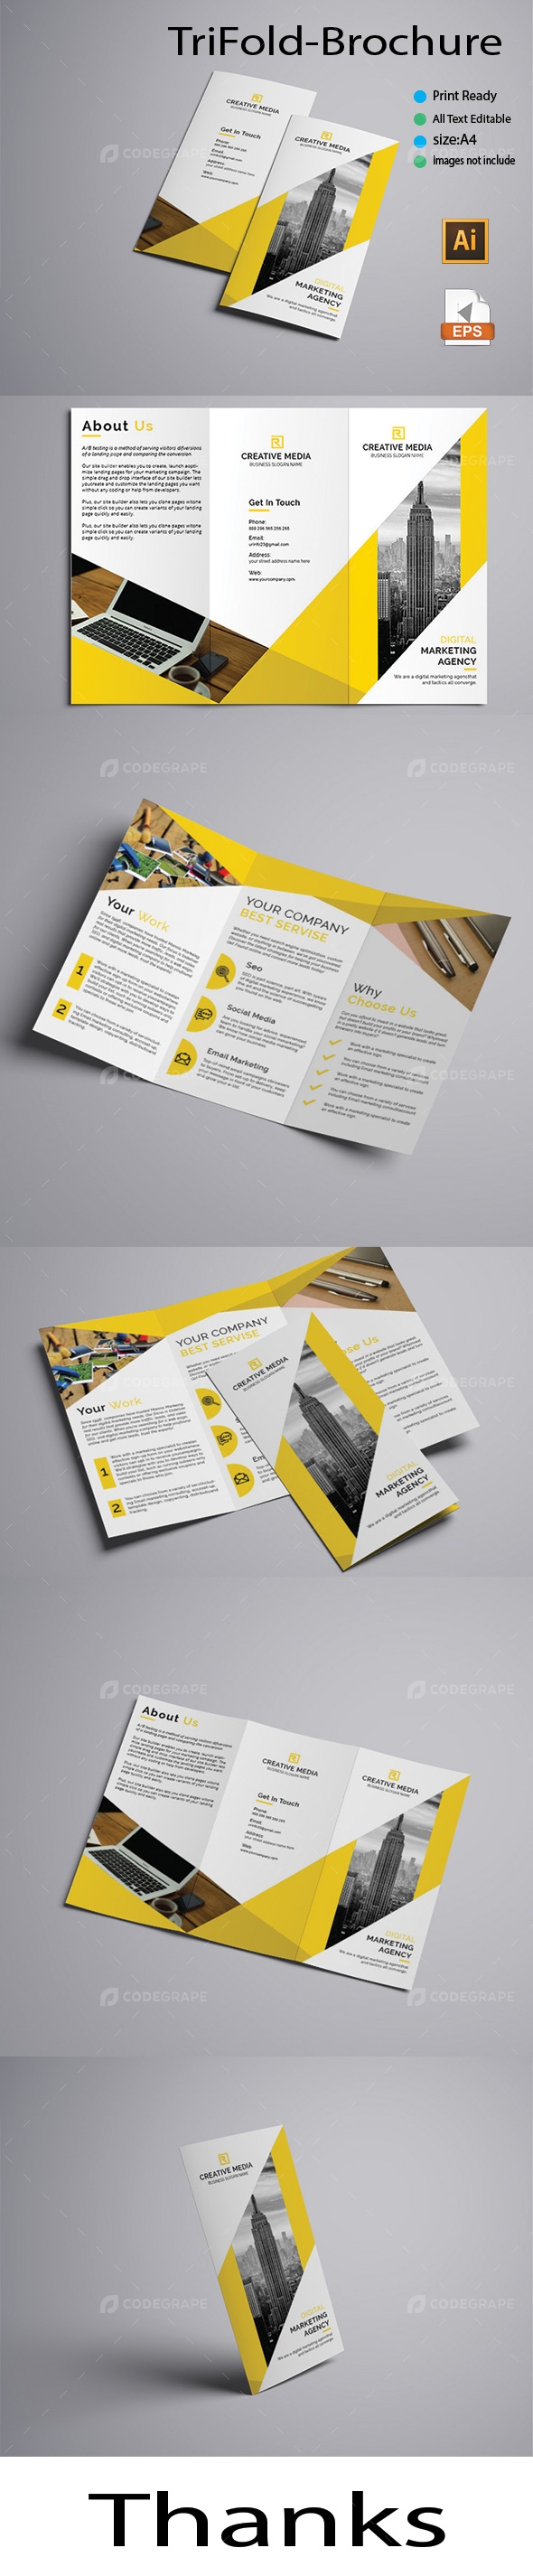 Trifold-Brochure